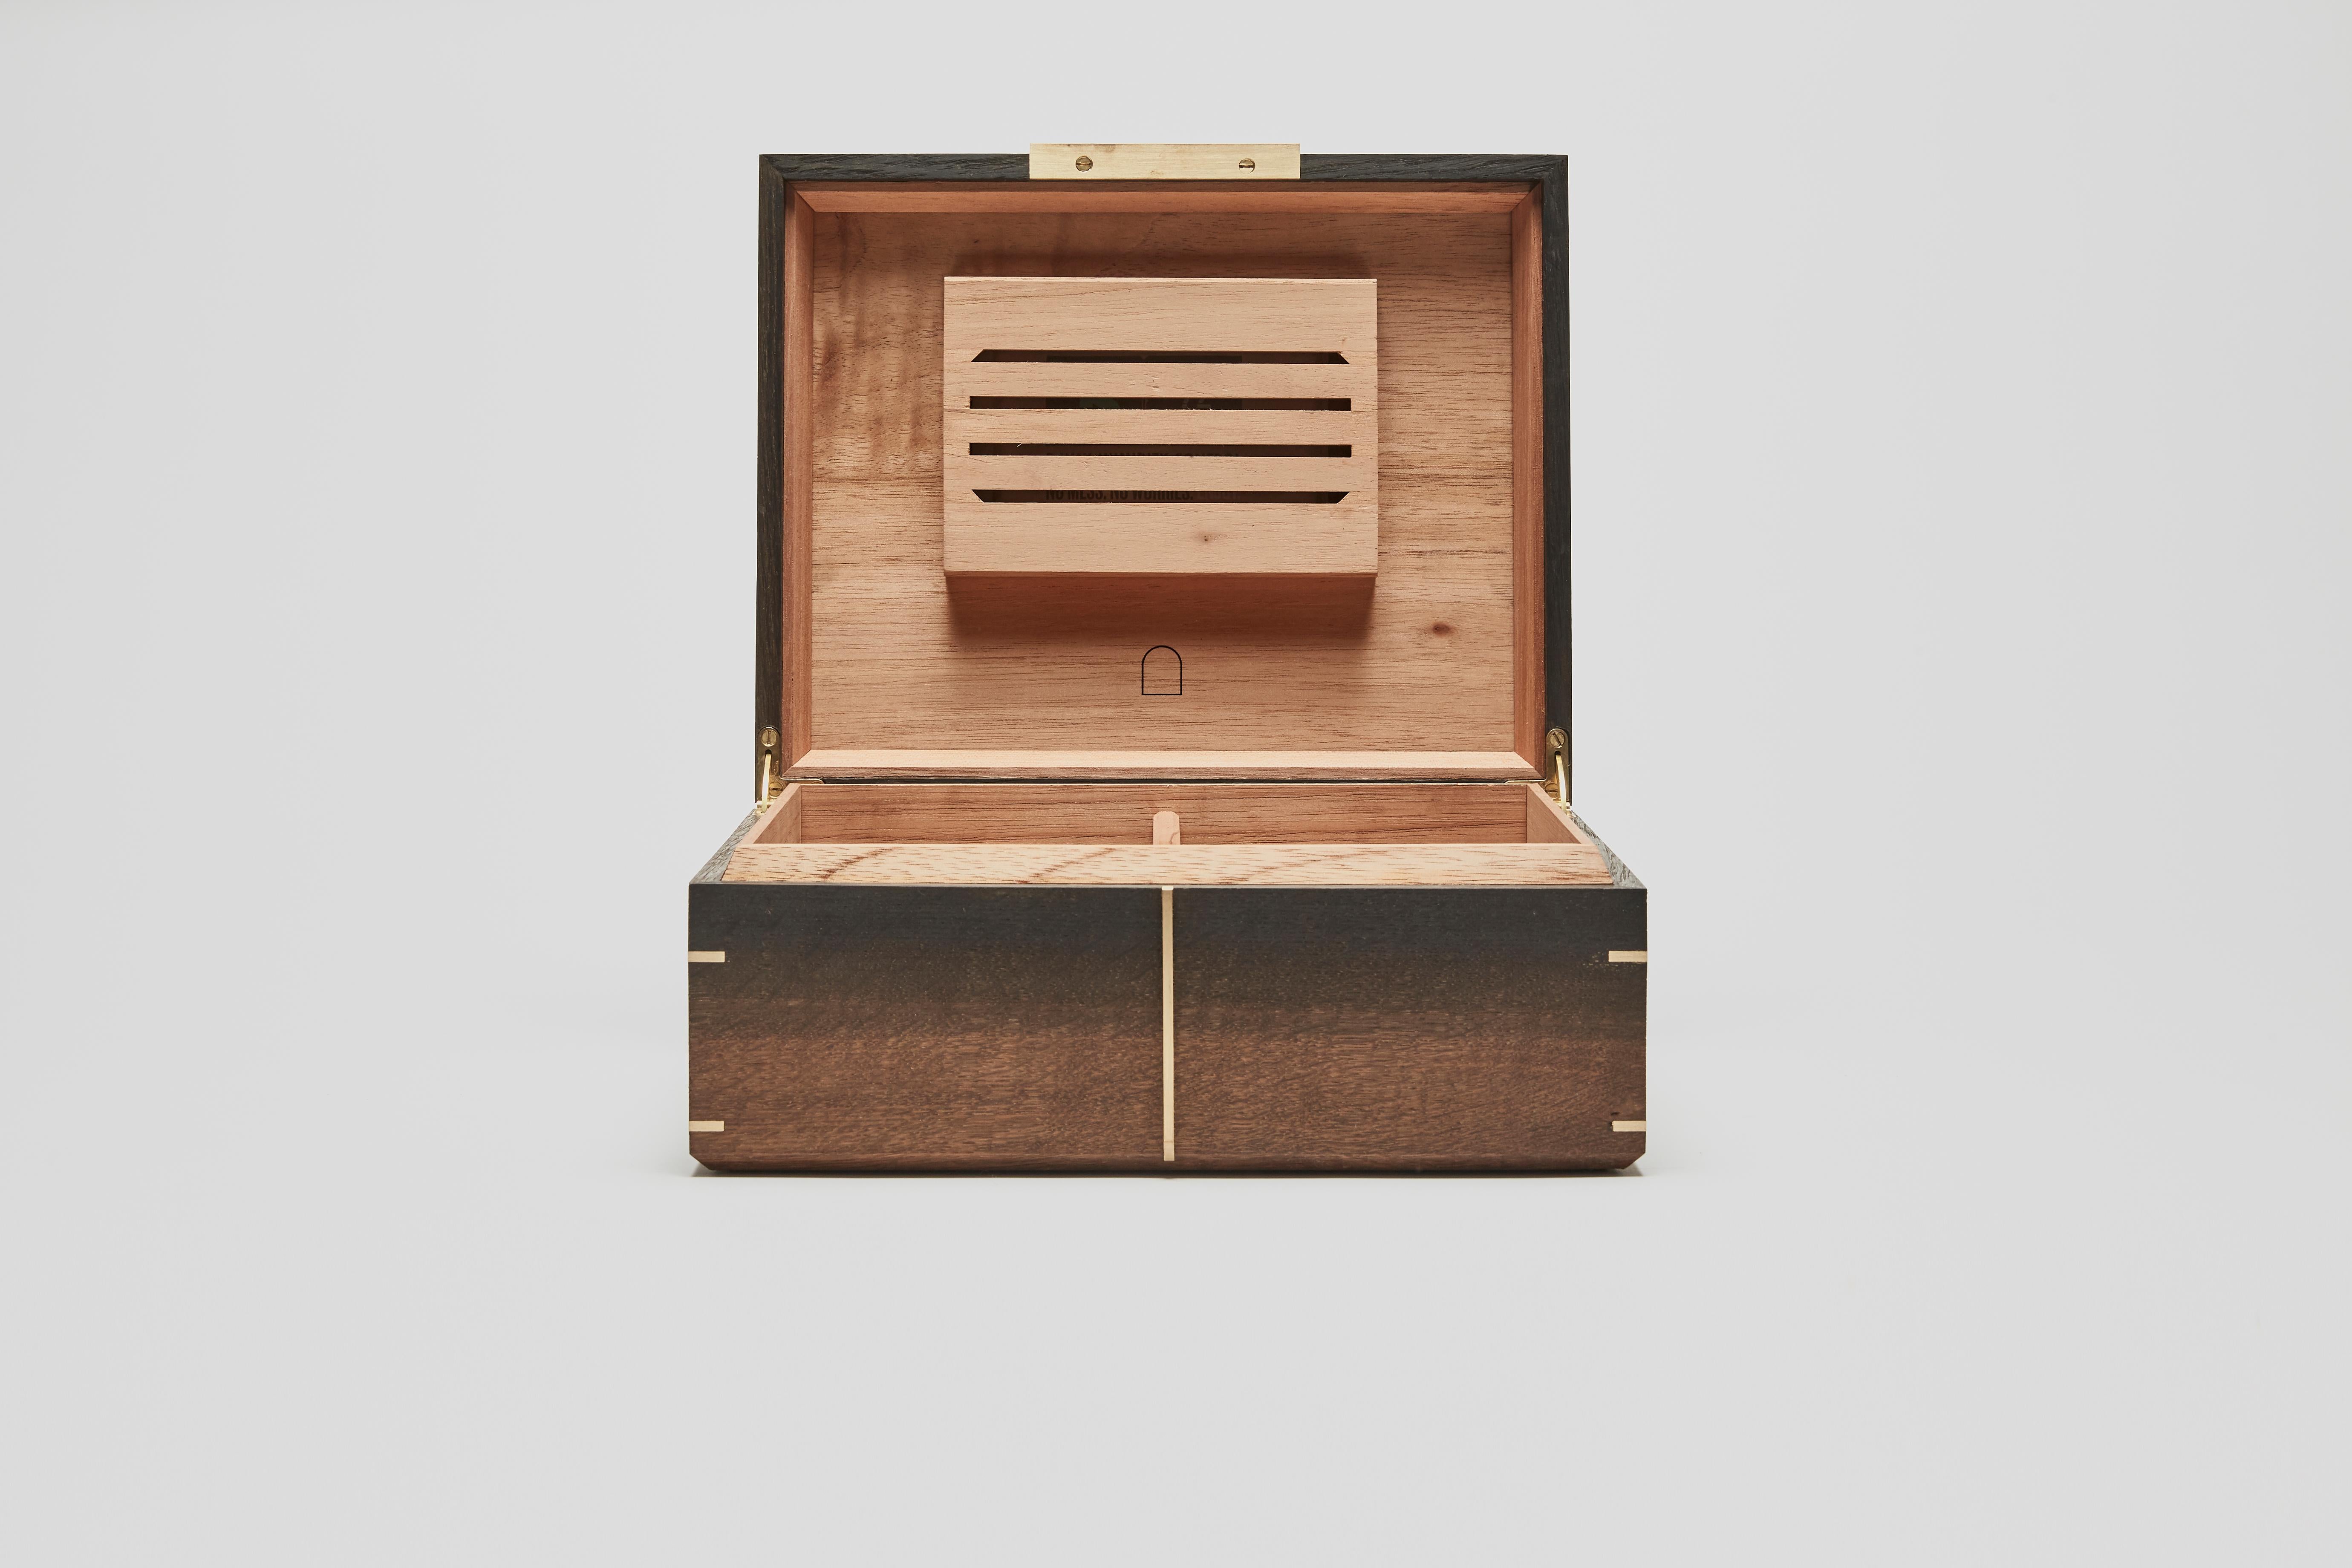 Dovedale — has designed two different humidors, a smaller humidor carrying fifty cigars and a more substantial to take a hundred cigars. Both are lined with Spanish cedar to keep the humidity, each with a magnetised case to hold your humidifier